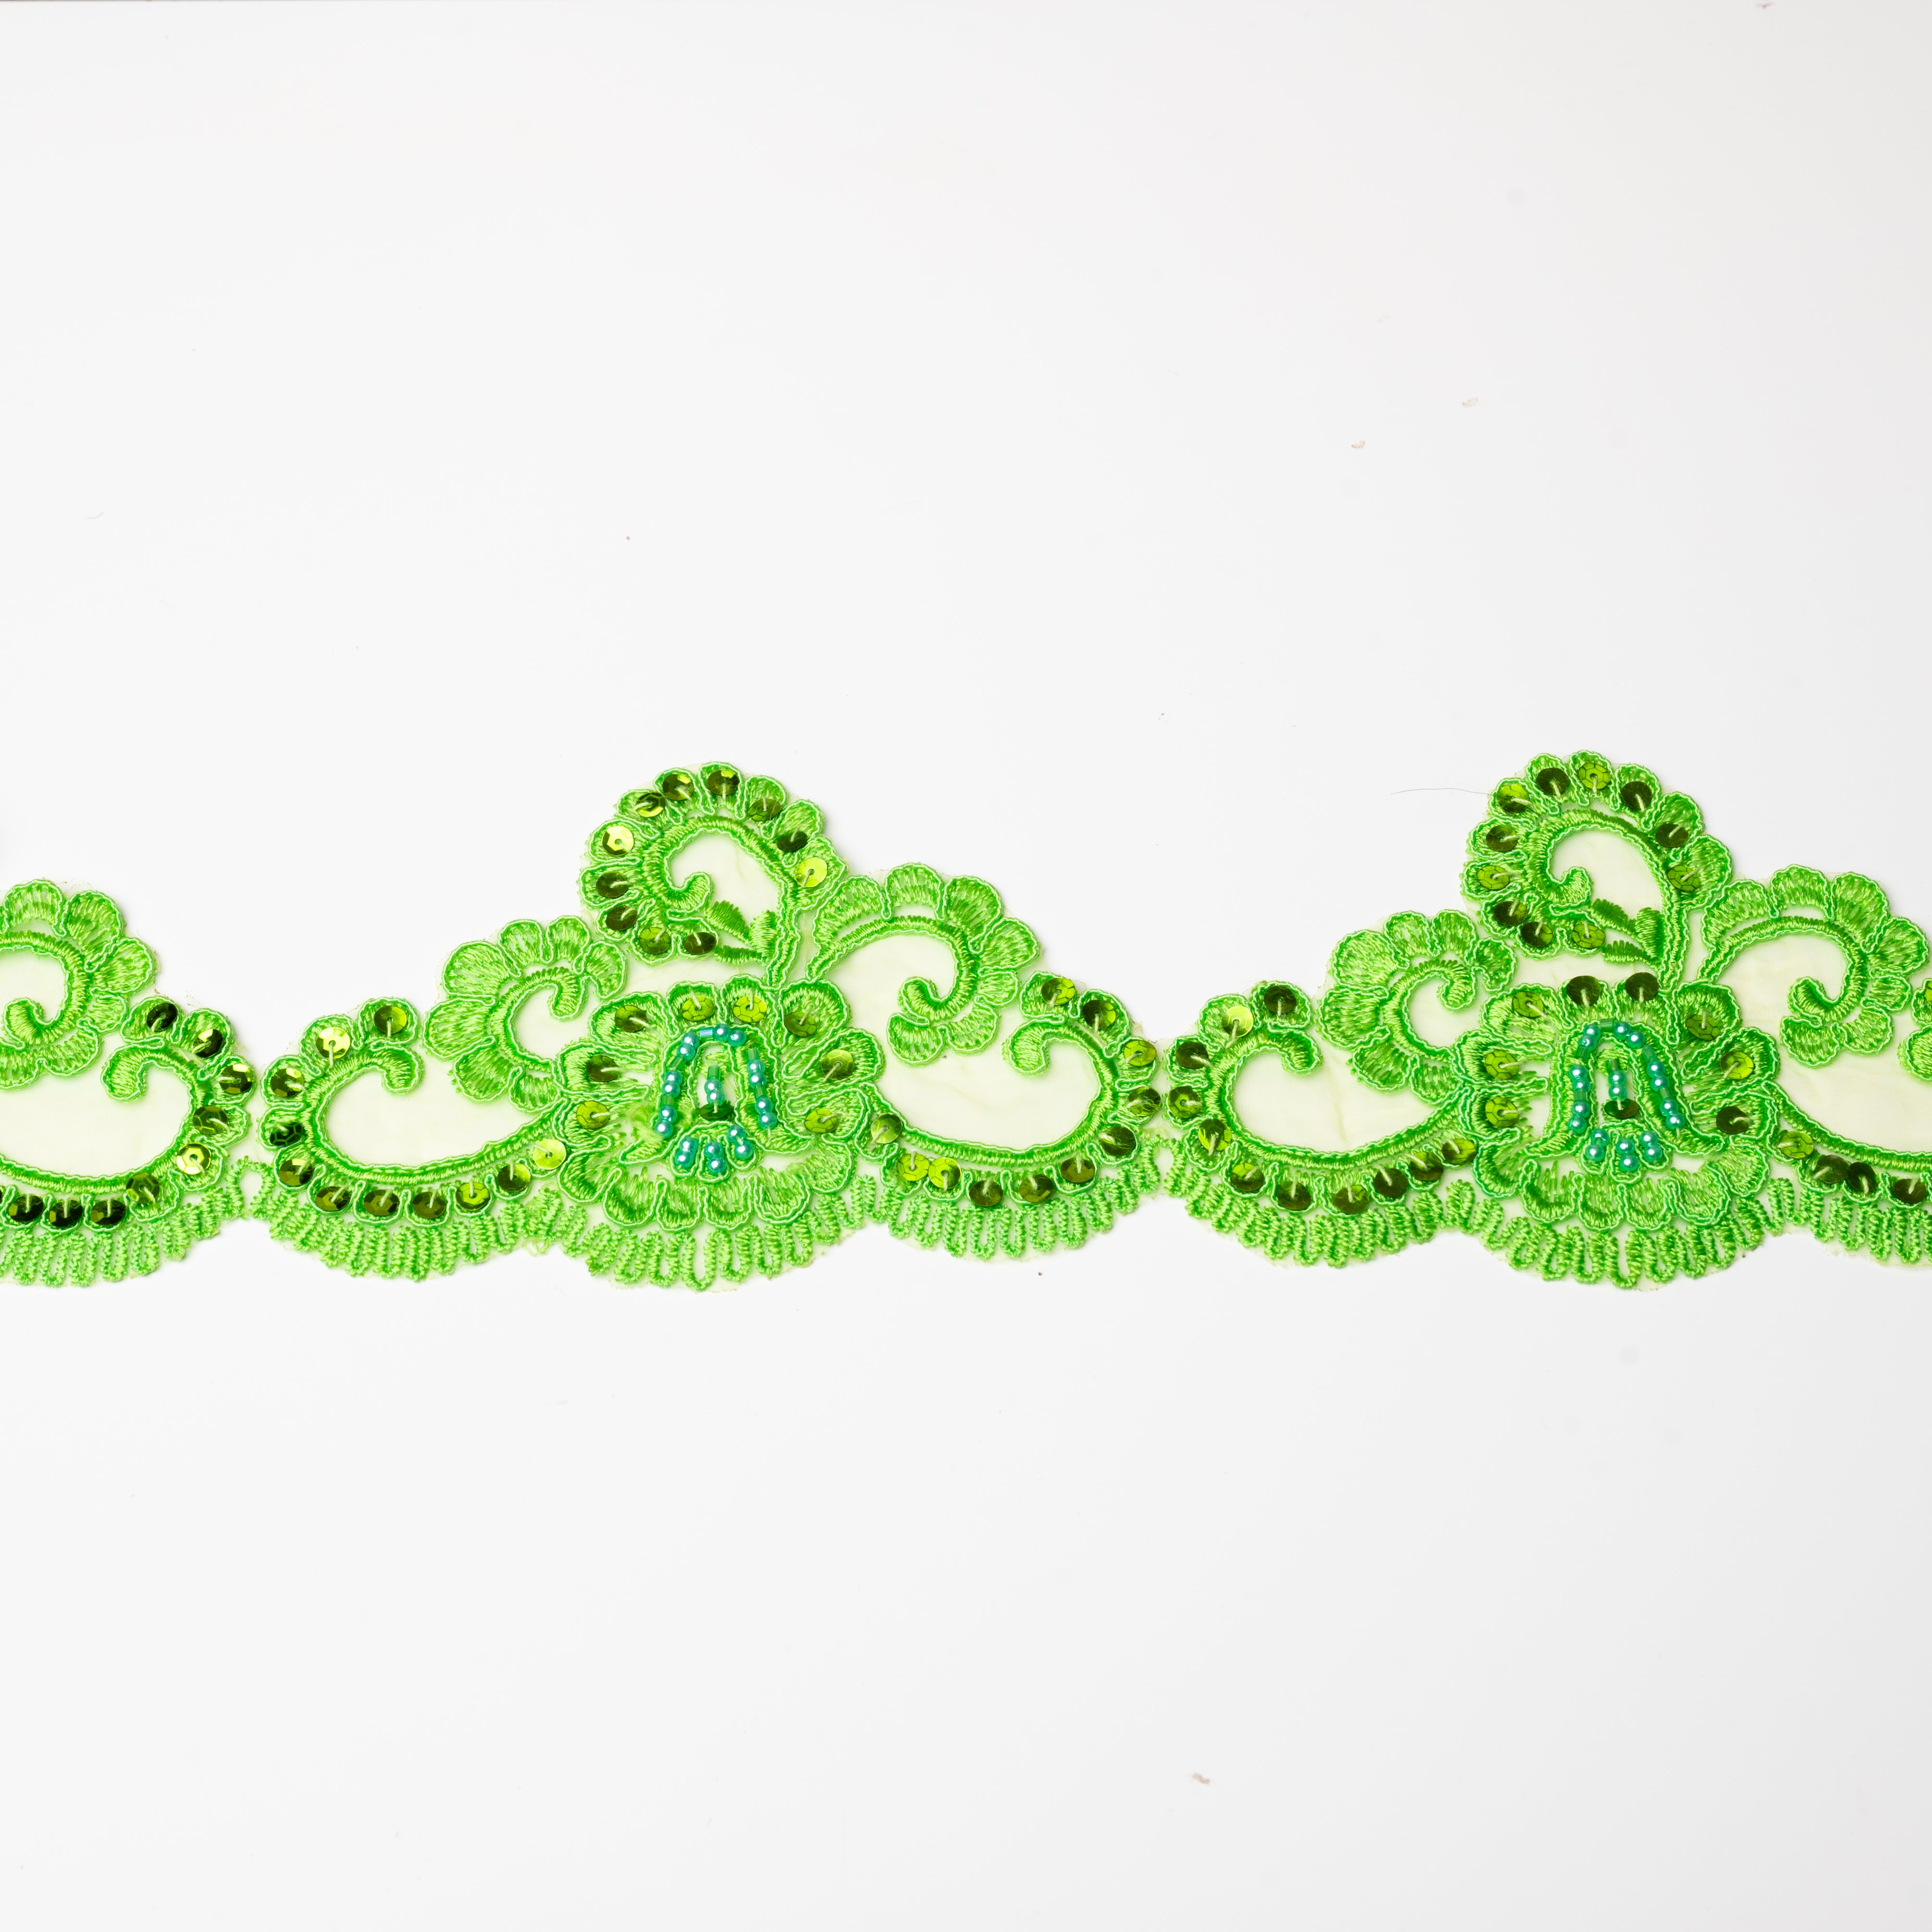 Green lace trim embellished with green sequins and blue pearls.